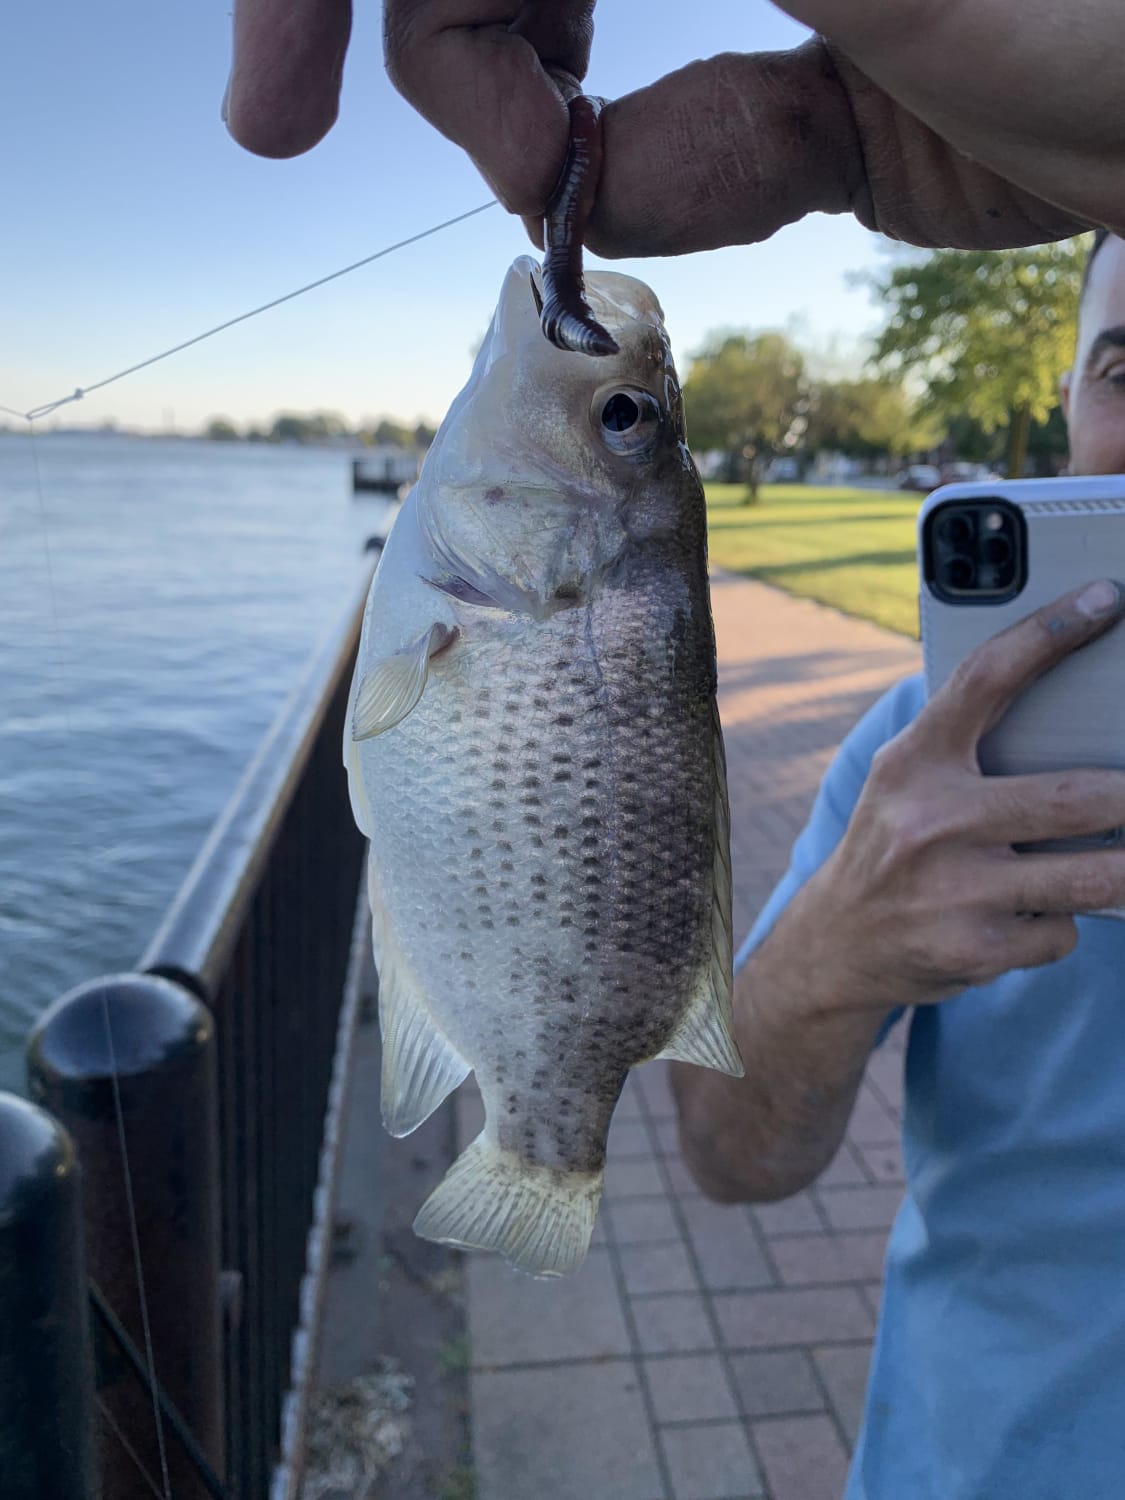 Interesting rock bass, any ideas why it’s so pale? (Caught out the Detroit river)